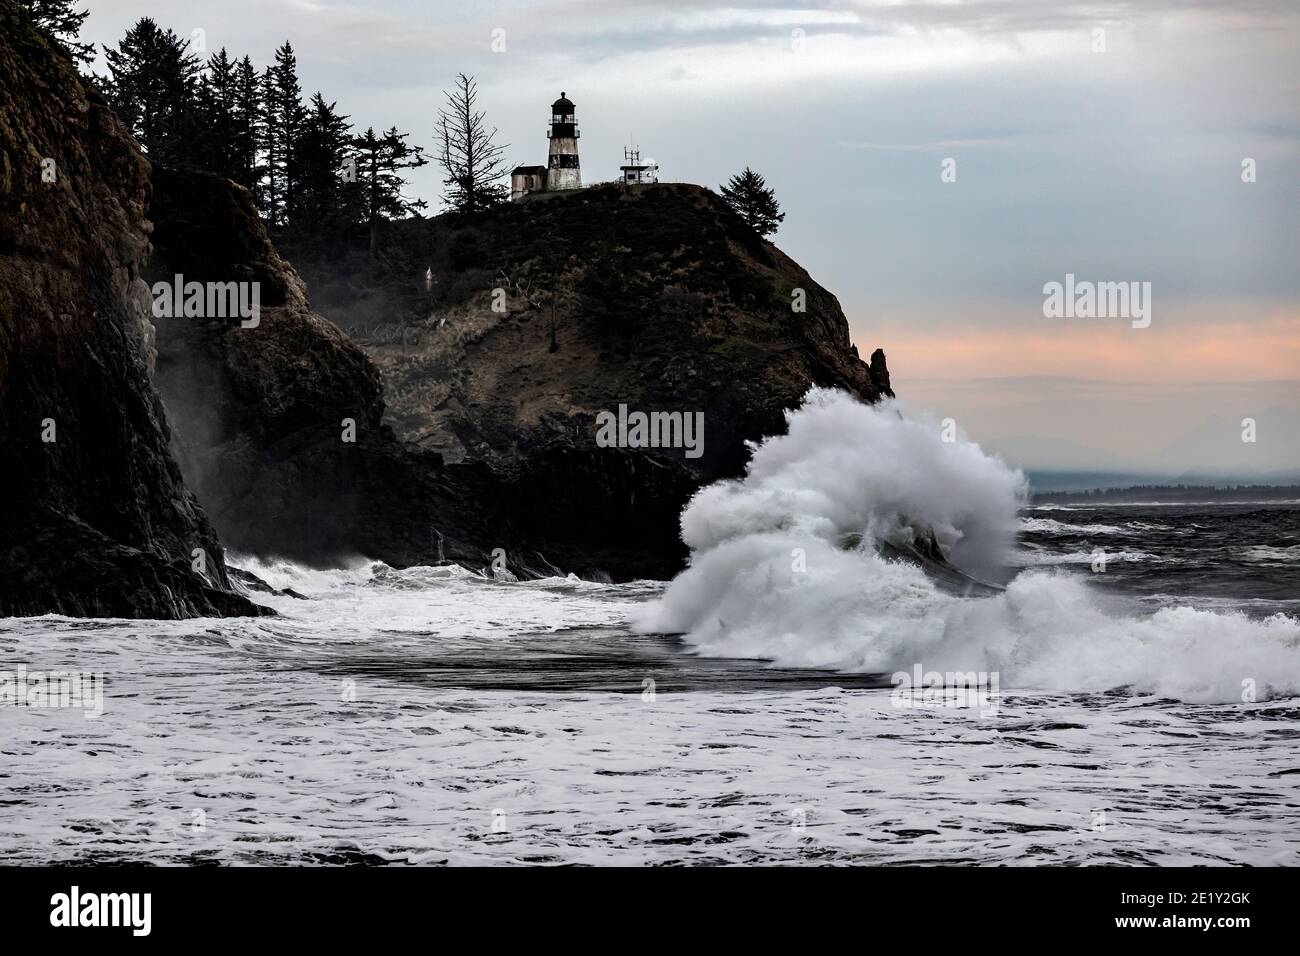 WA20031-00.....WASHIHGTON - Crashing surf at Cape Disappointment Lighthouse near the outflow of the Columbia River in Cape Disappointment State Park. Stock Photo